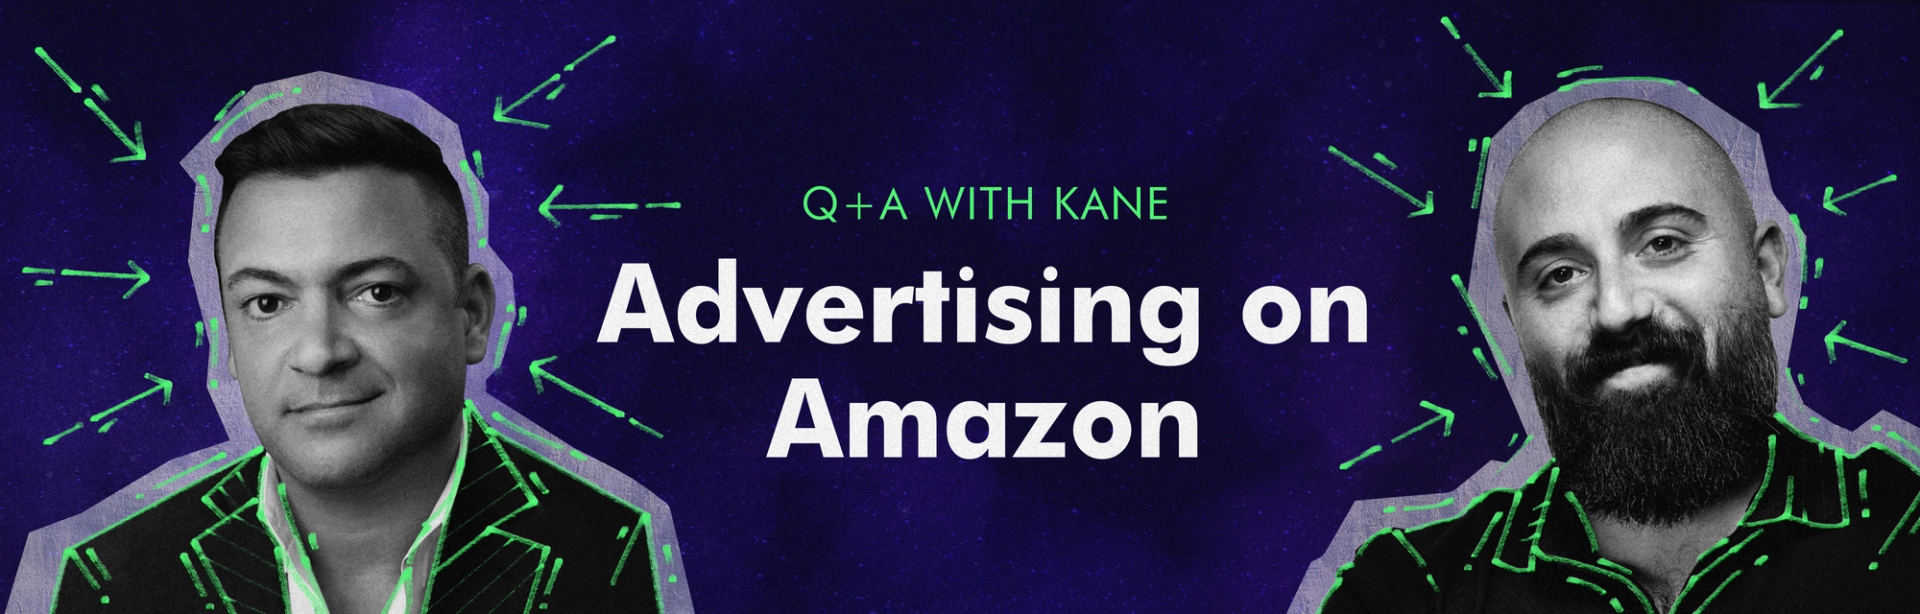 Q&A with KANE: How to Advertise on Amazon